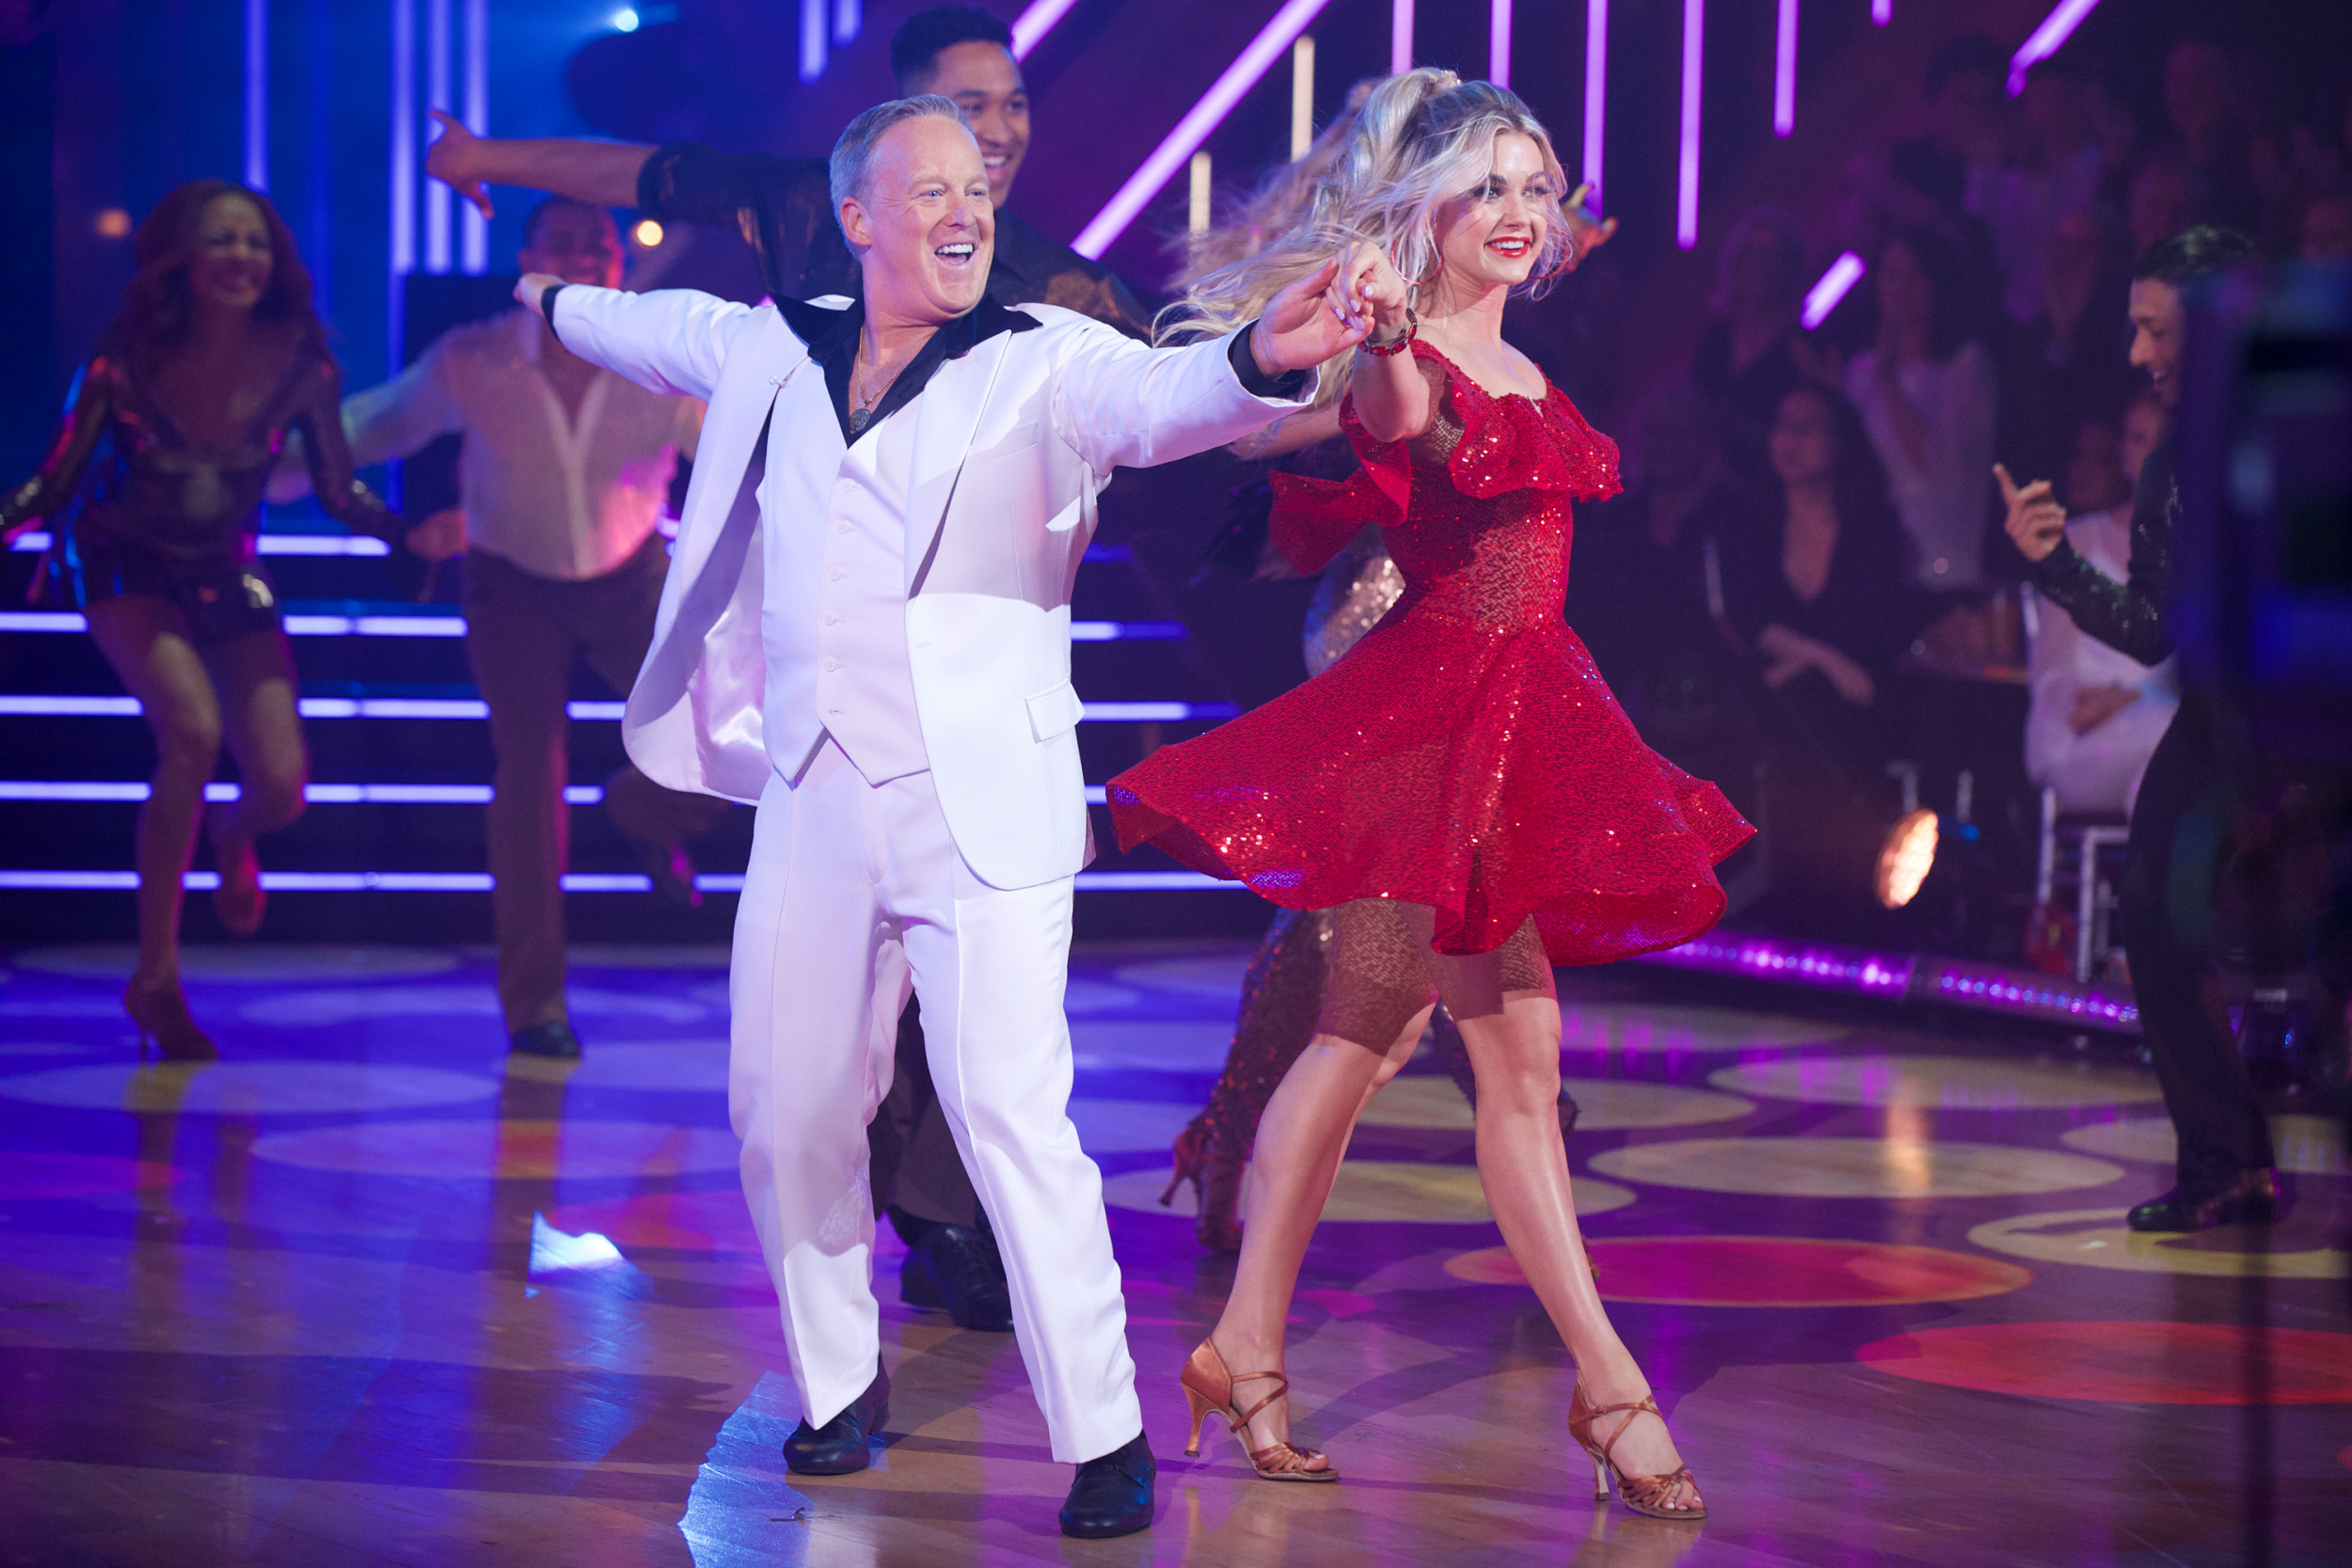 'Dancing With The Stars' Elimination Predictions Who Will Go Home Week 4?